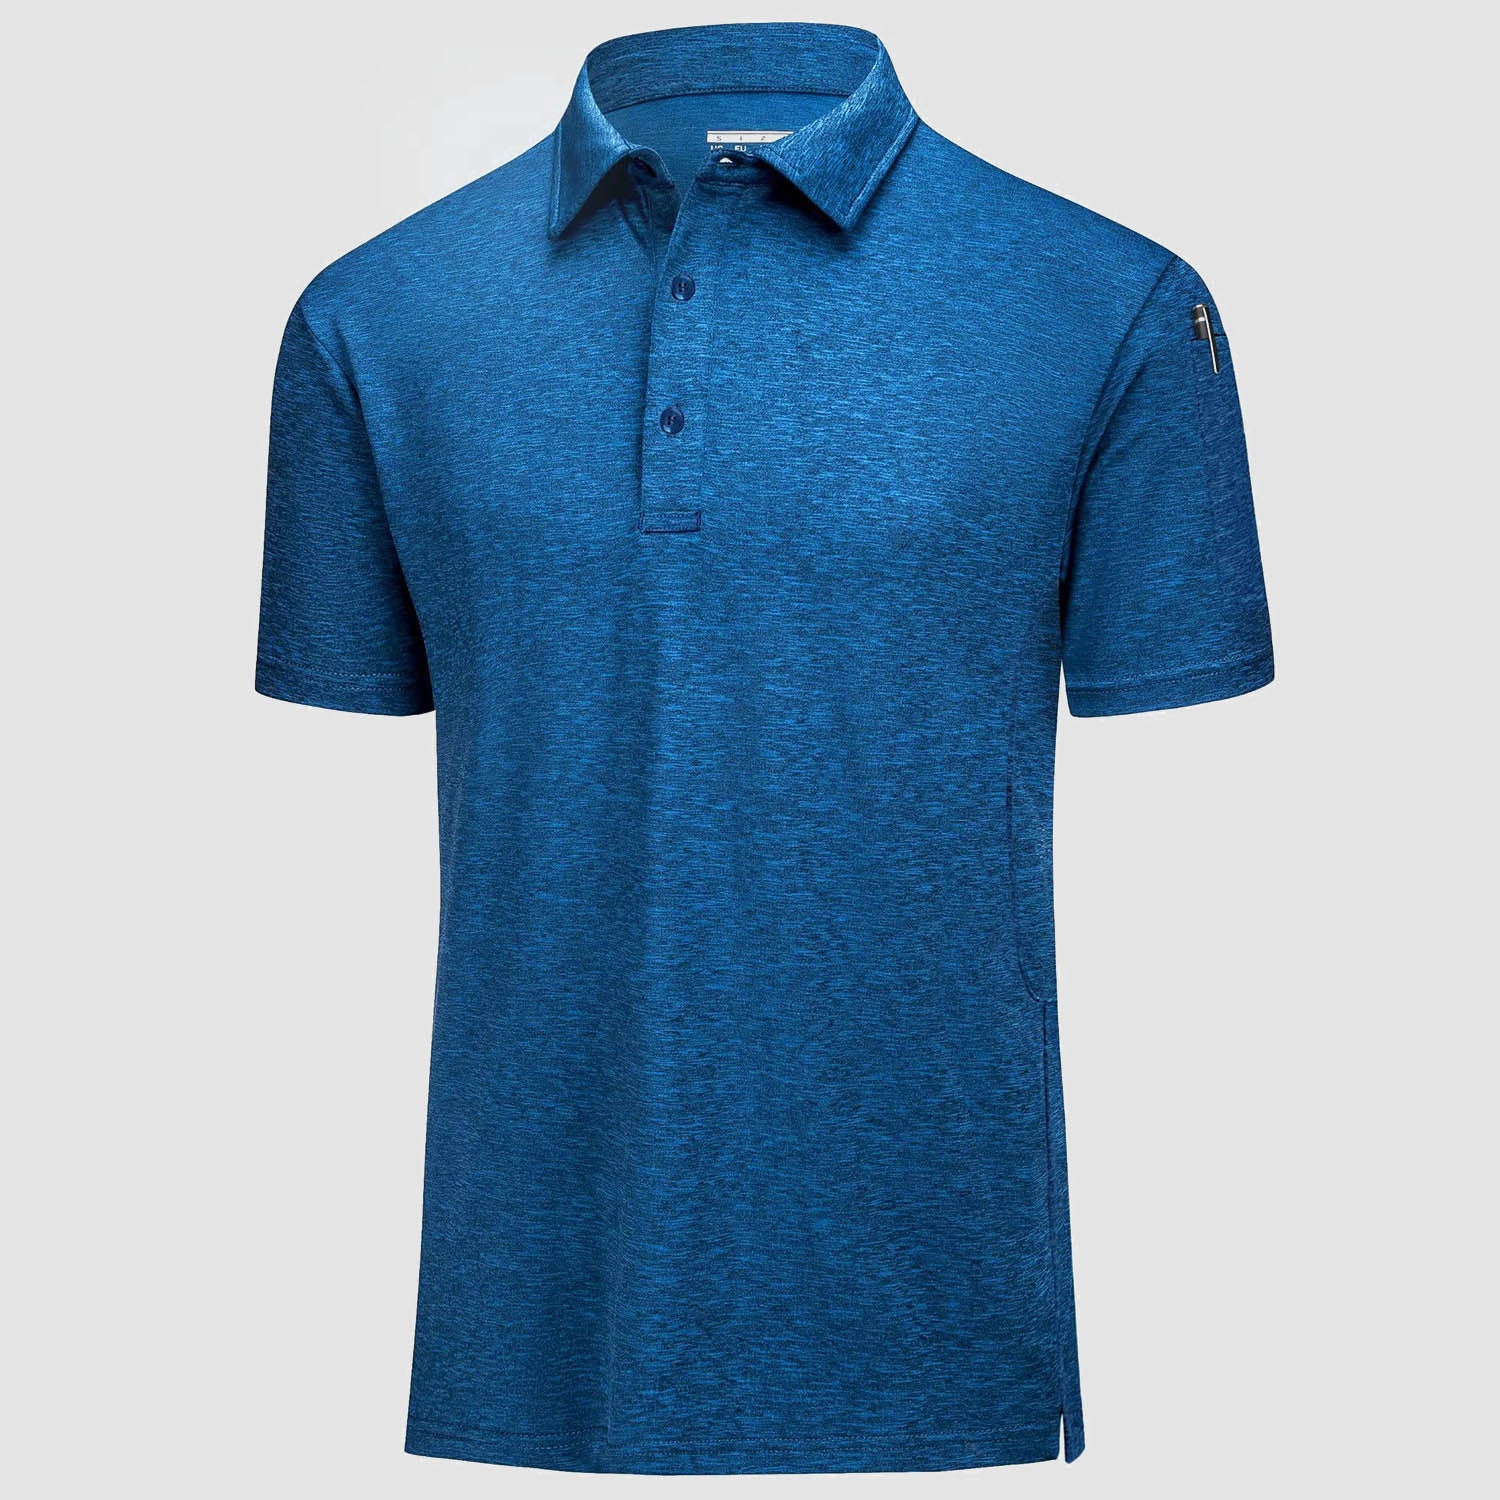 Men's Jersey Breathable Polo T-shirt Quick Dry Performance Golf Sports